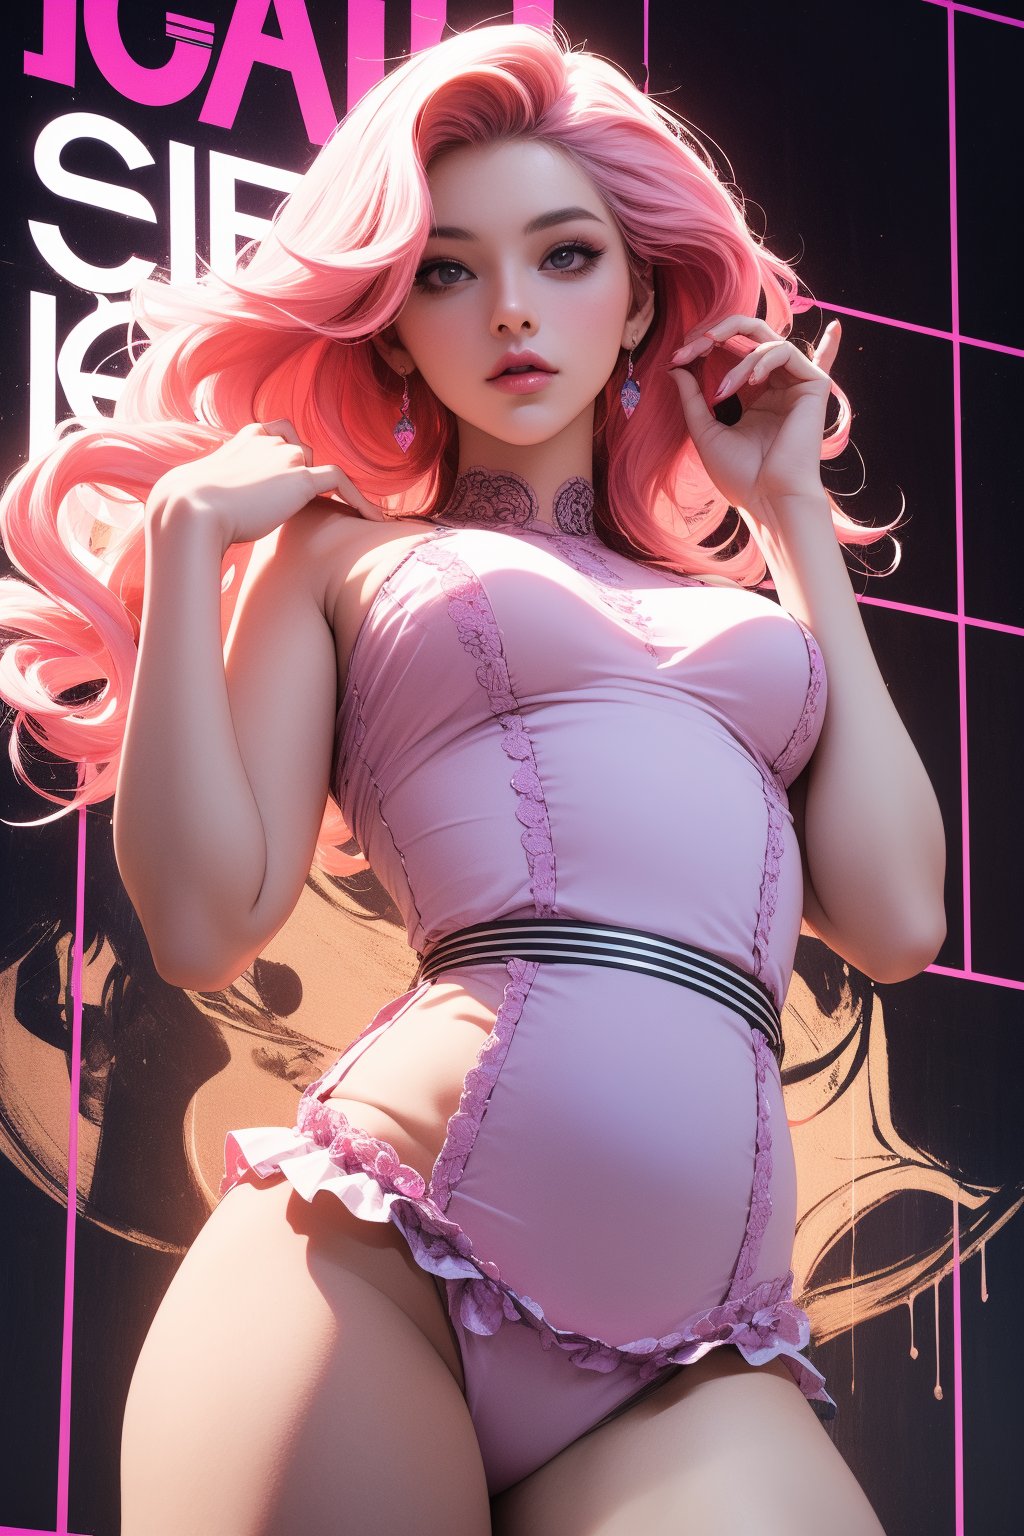 1girl, Charlie Kyrn, looking at viewer, thigh up body, rockstar idol, styled outfit, on stage, professional lighting, red-pink-purple-yellow hair, different hairstyle, coloful, magazine cover, best quality, masterpiece,johyun,kmiu,Charlie Kyrn